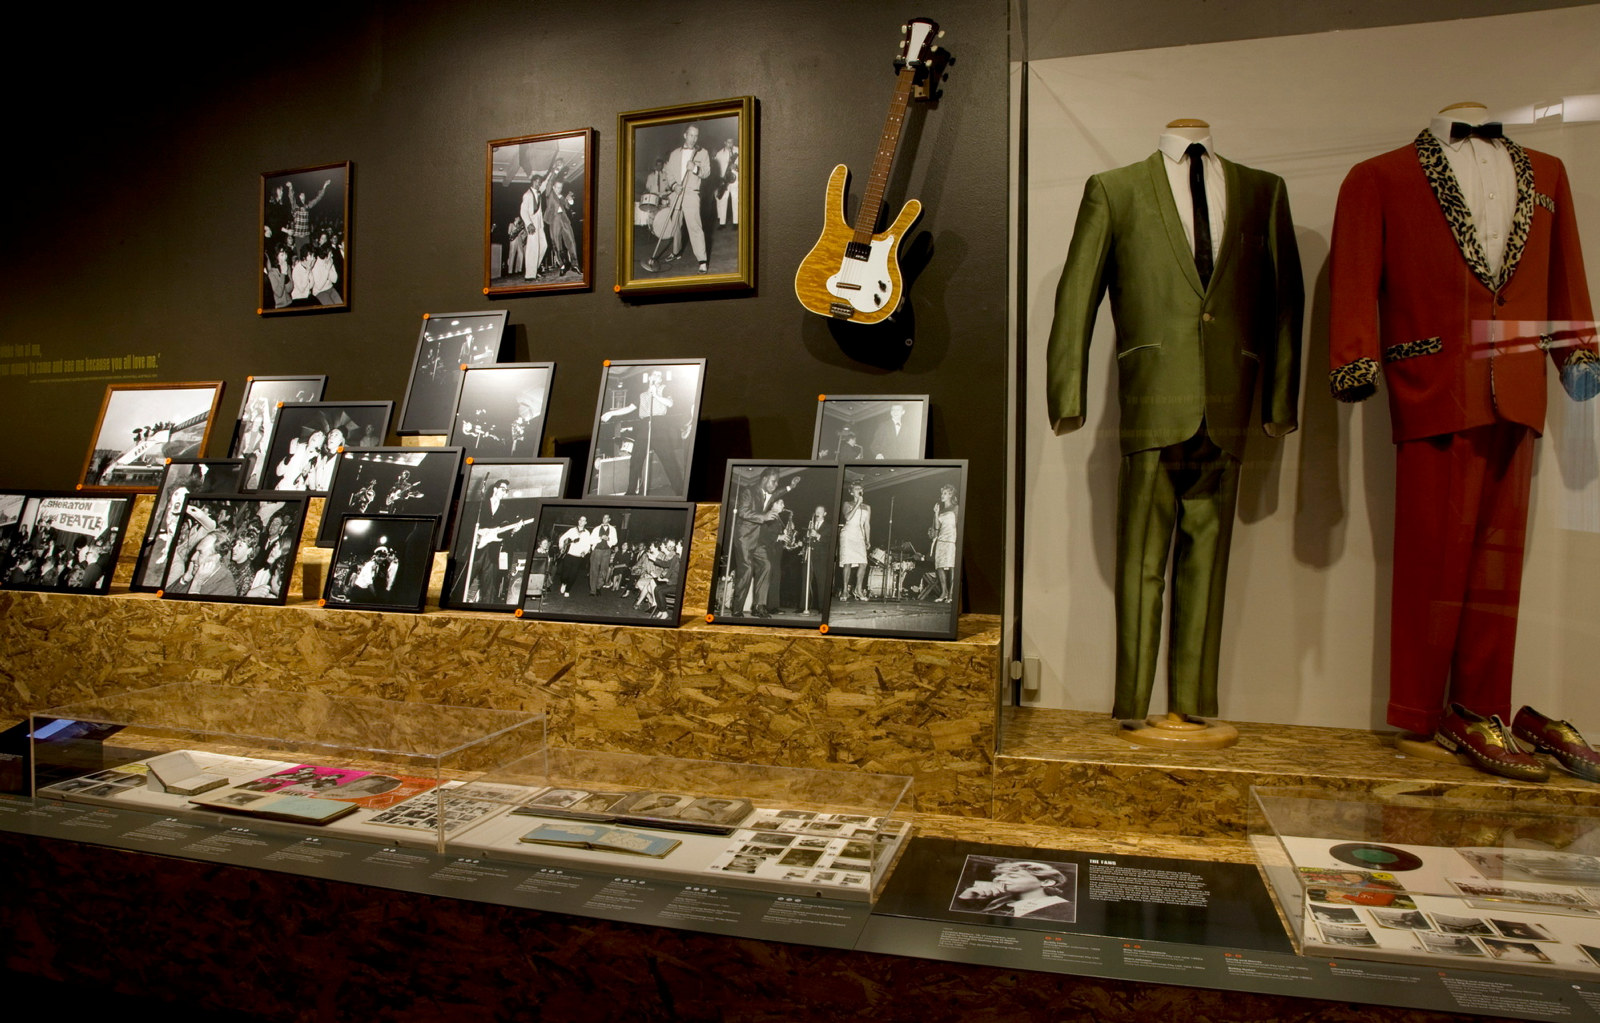 Interior view of exhibition space showing guitars, framed photographs and suits.